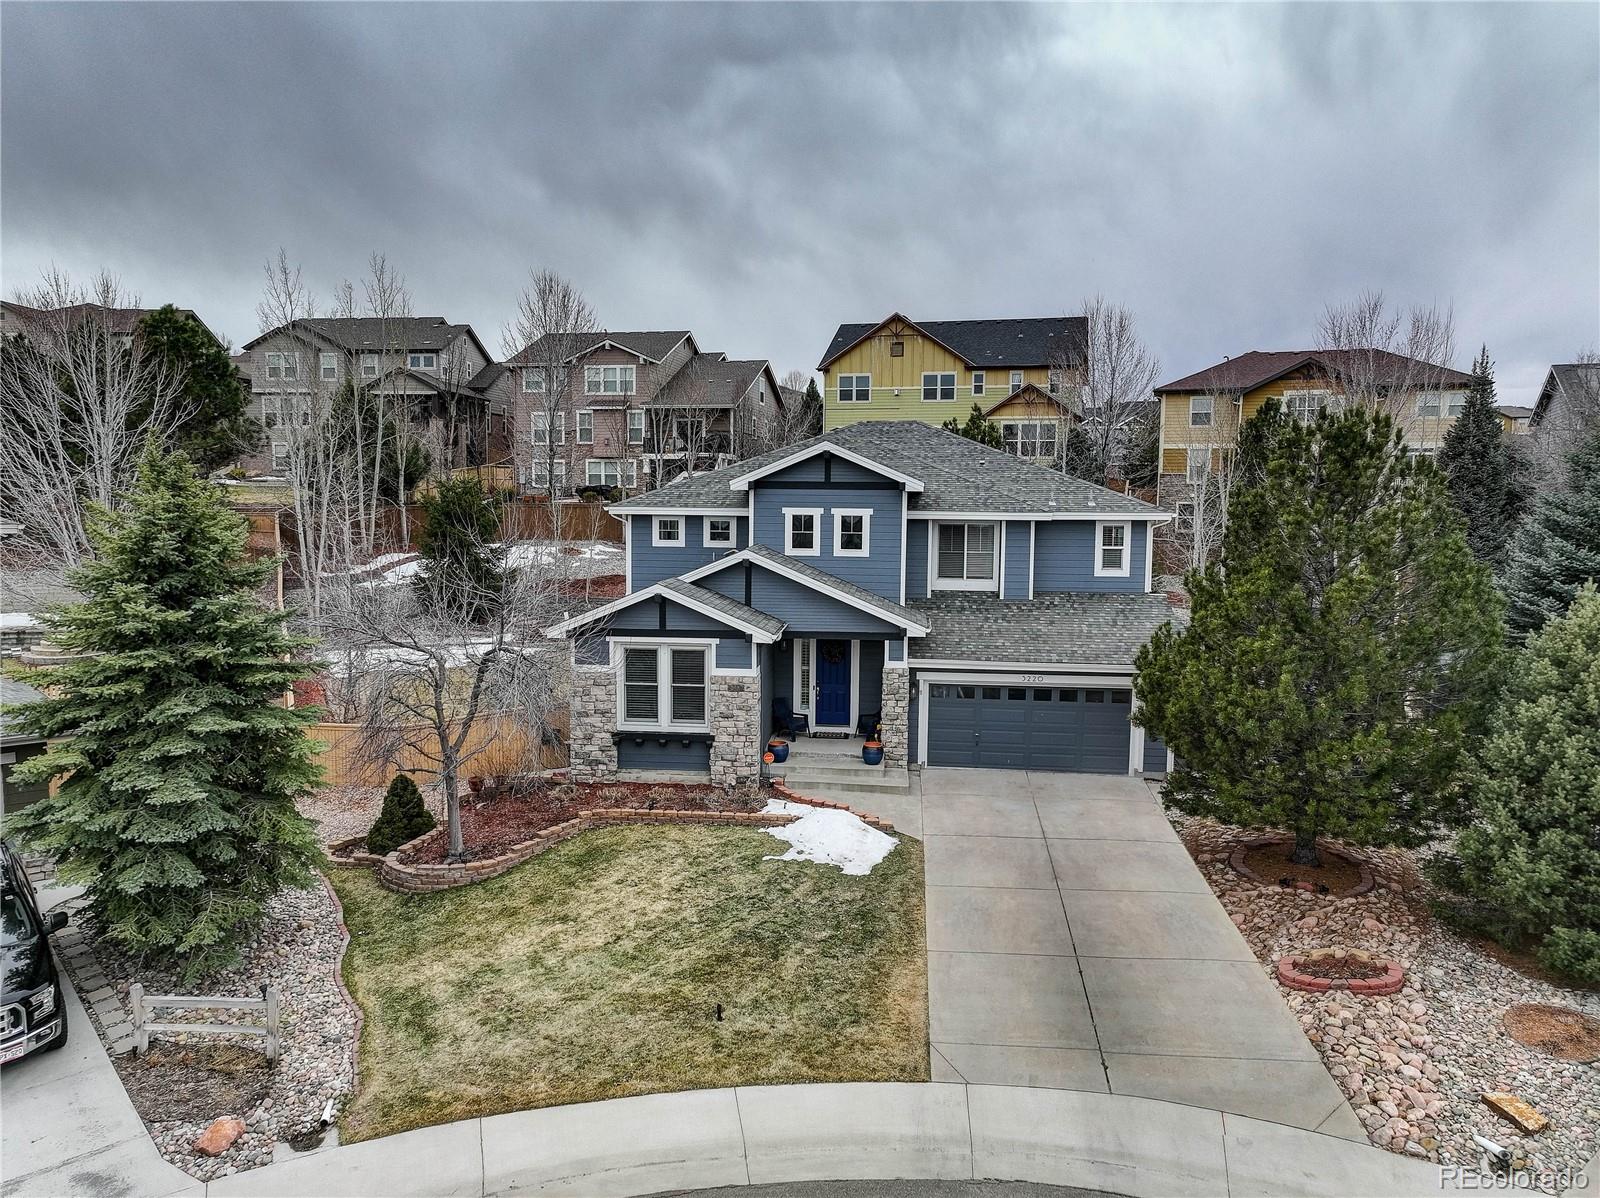 Report Image for 3220  Chandon Court,Highlands Ranch, Colorado